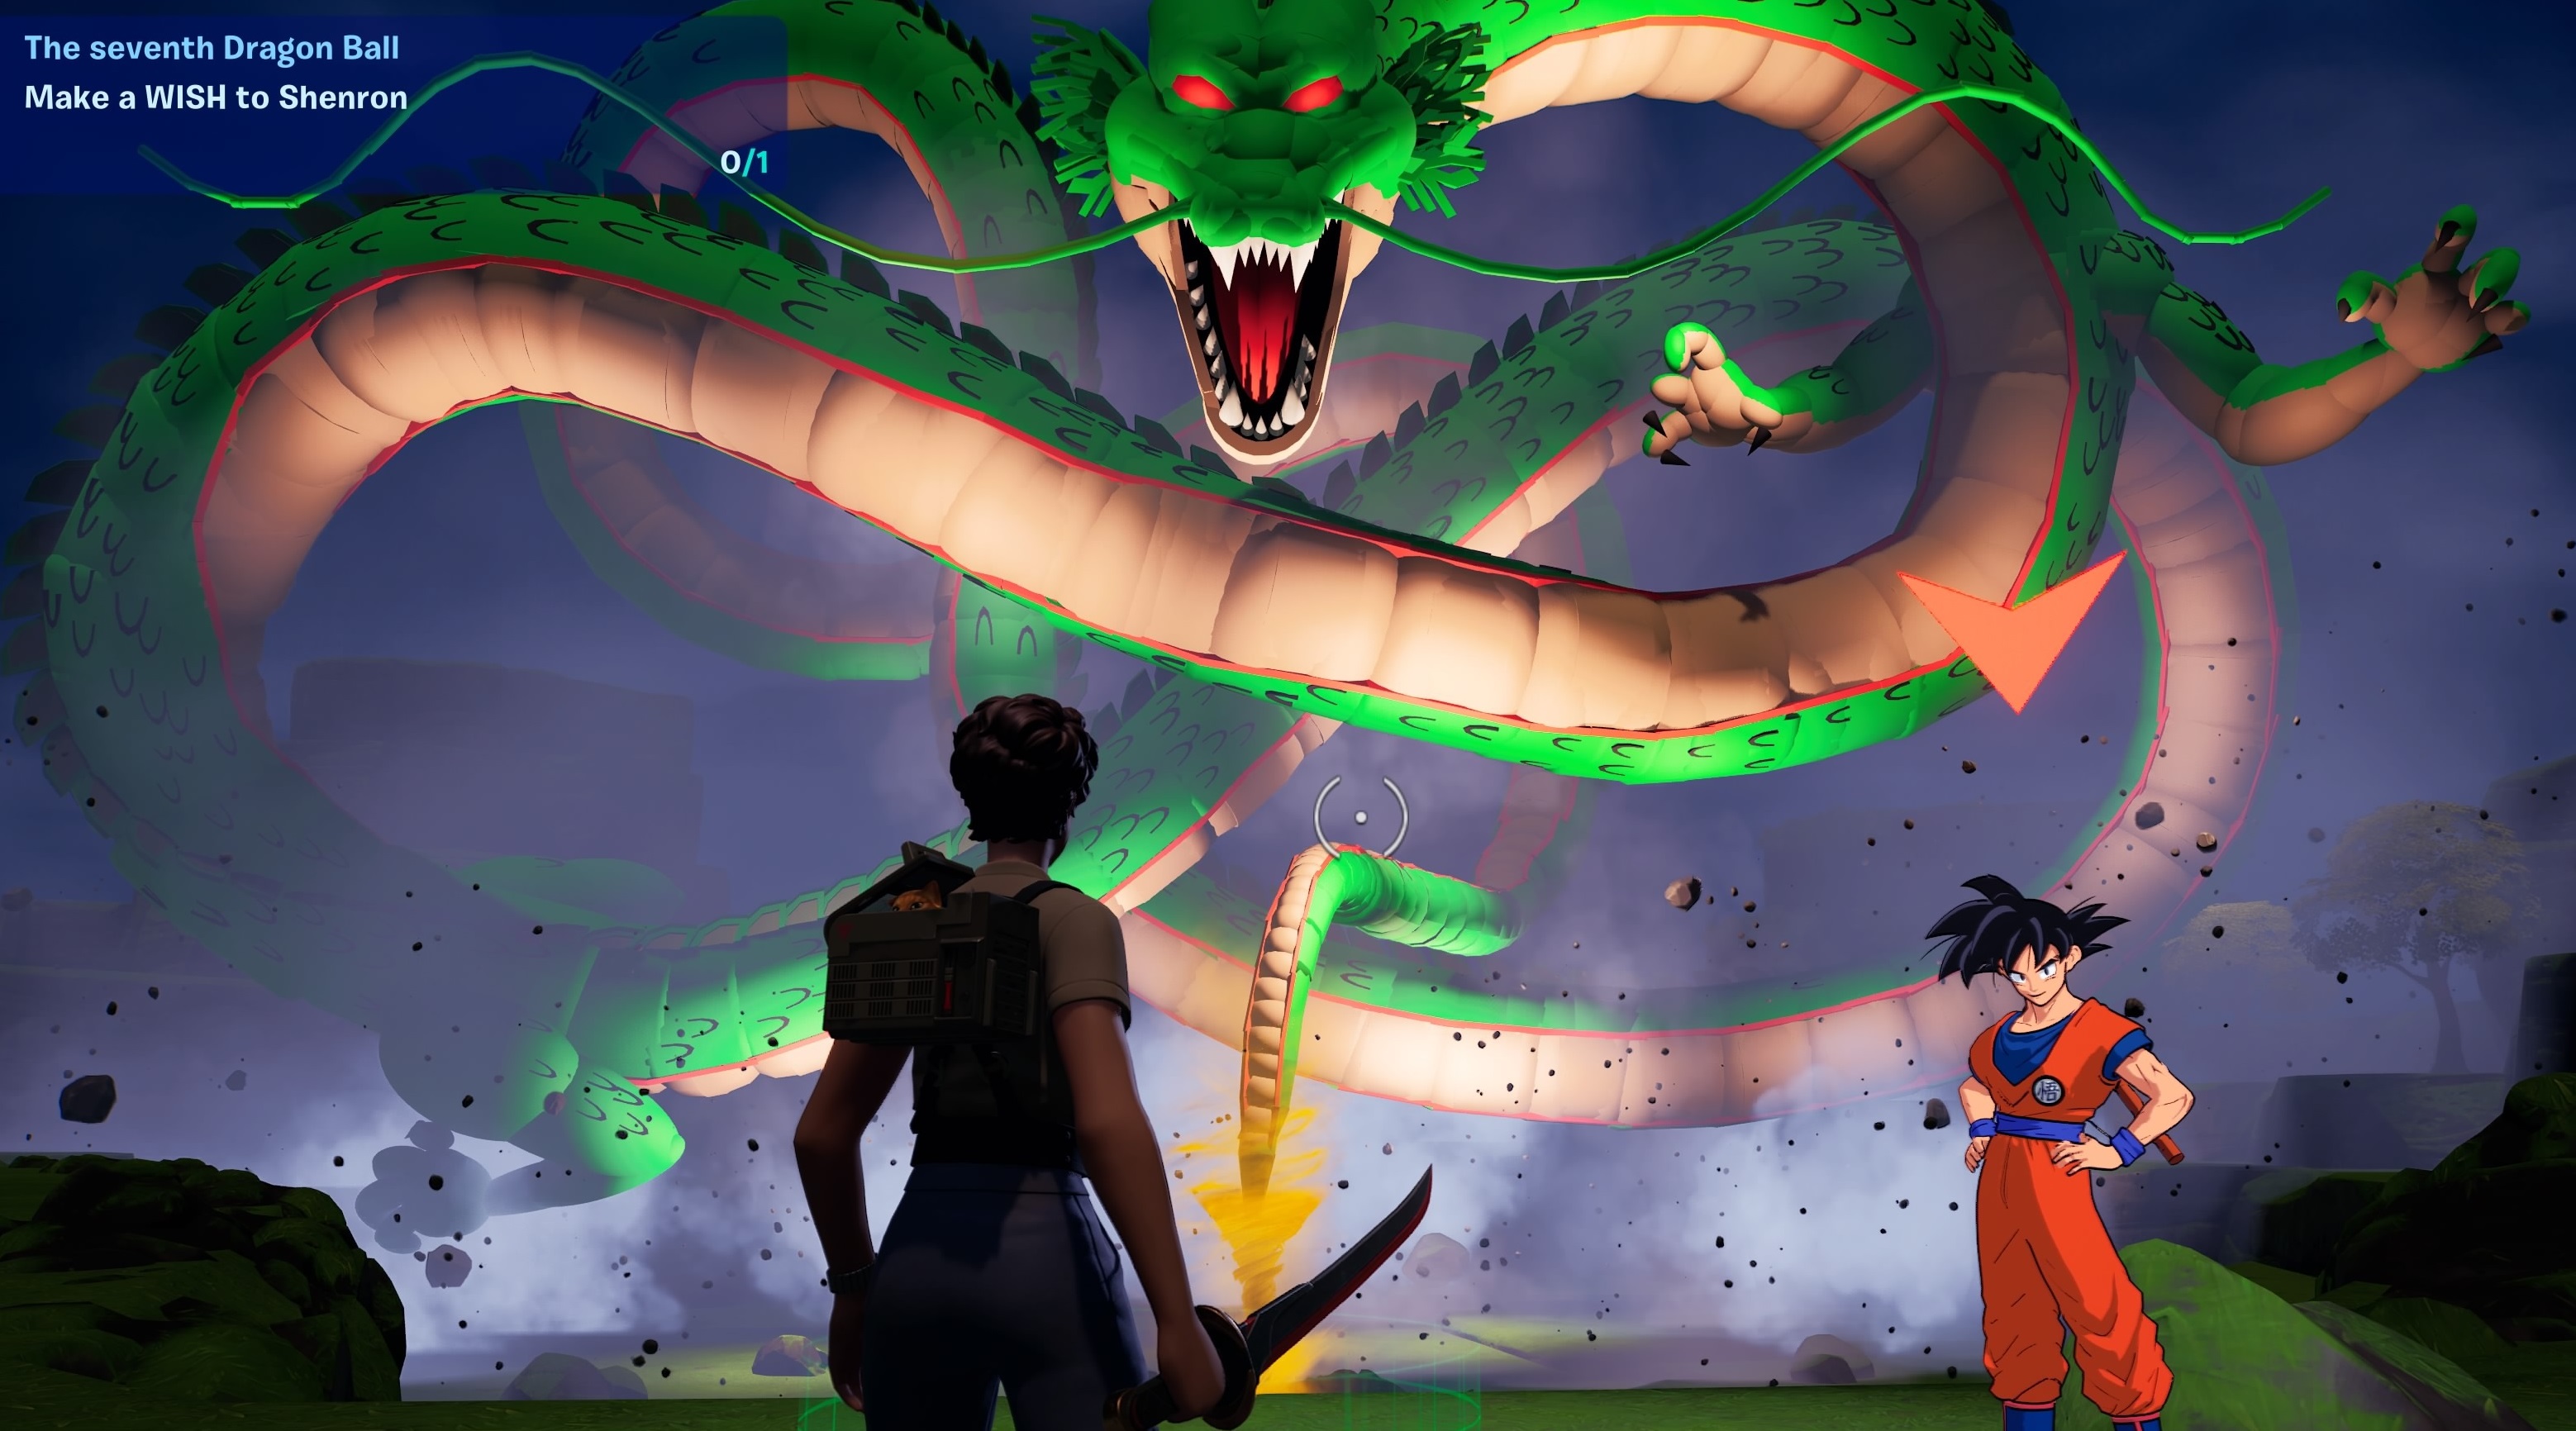 Dragon Ball locations in Fortnite: Where to find all 7 Dragon